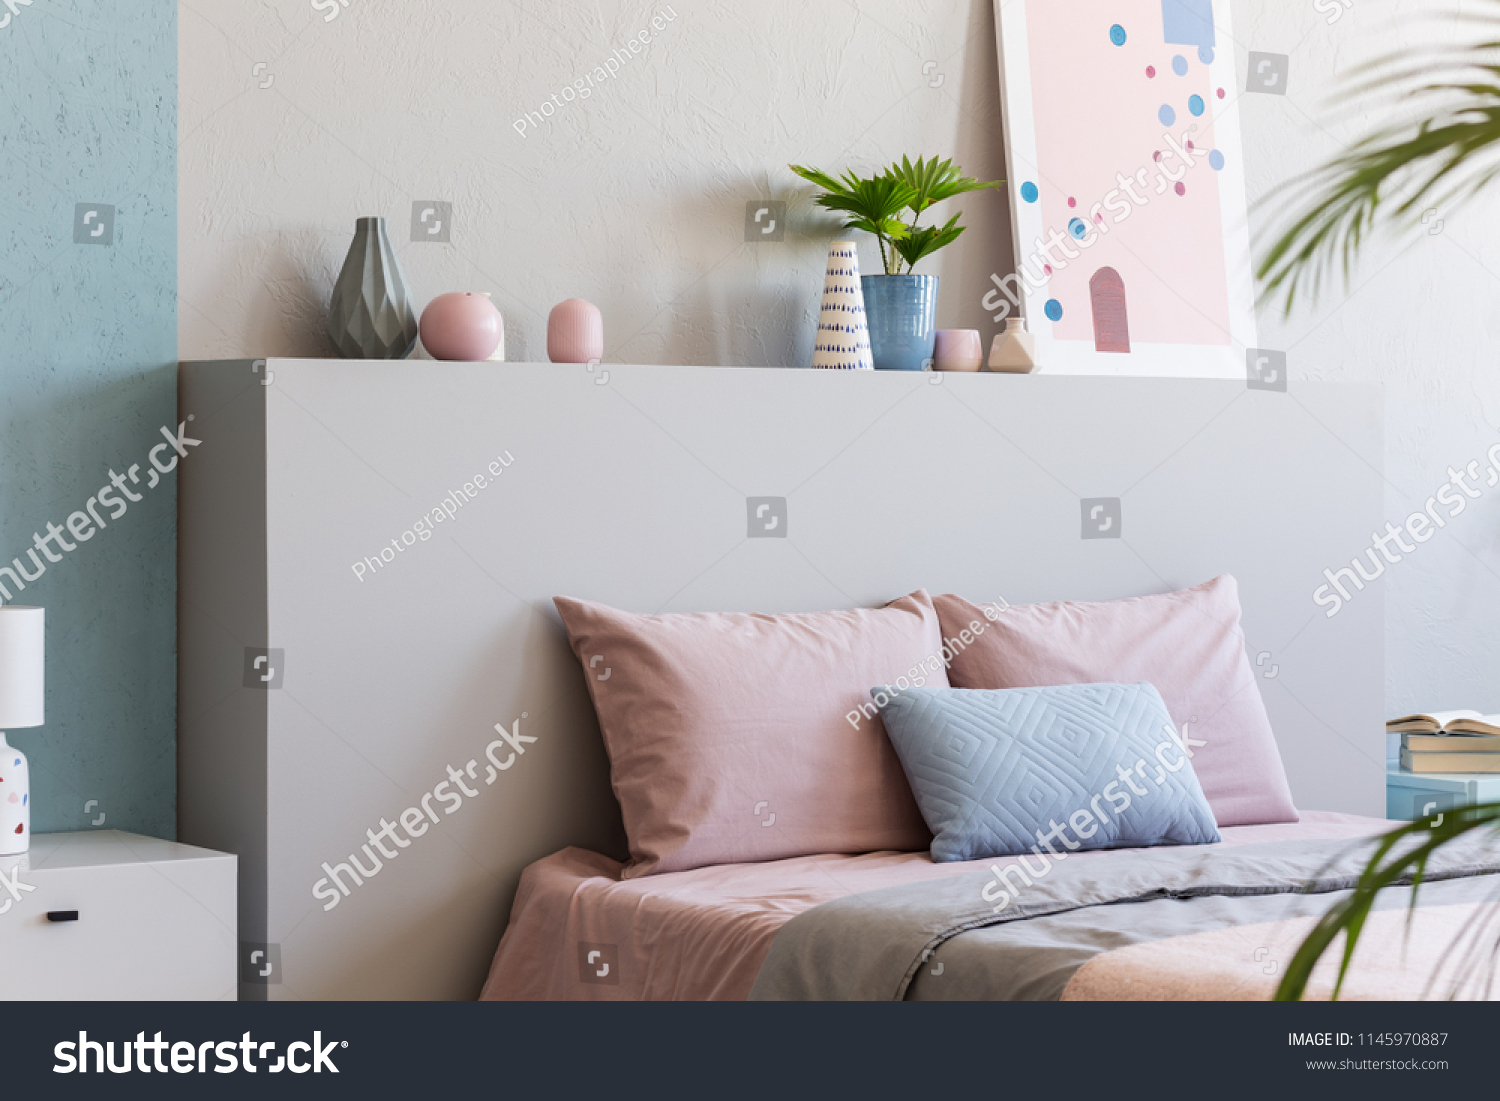 Poster on headboard of bed with pink pillows in bedroom interior with plants. Real photo #1145970887